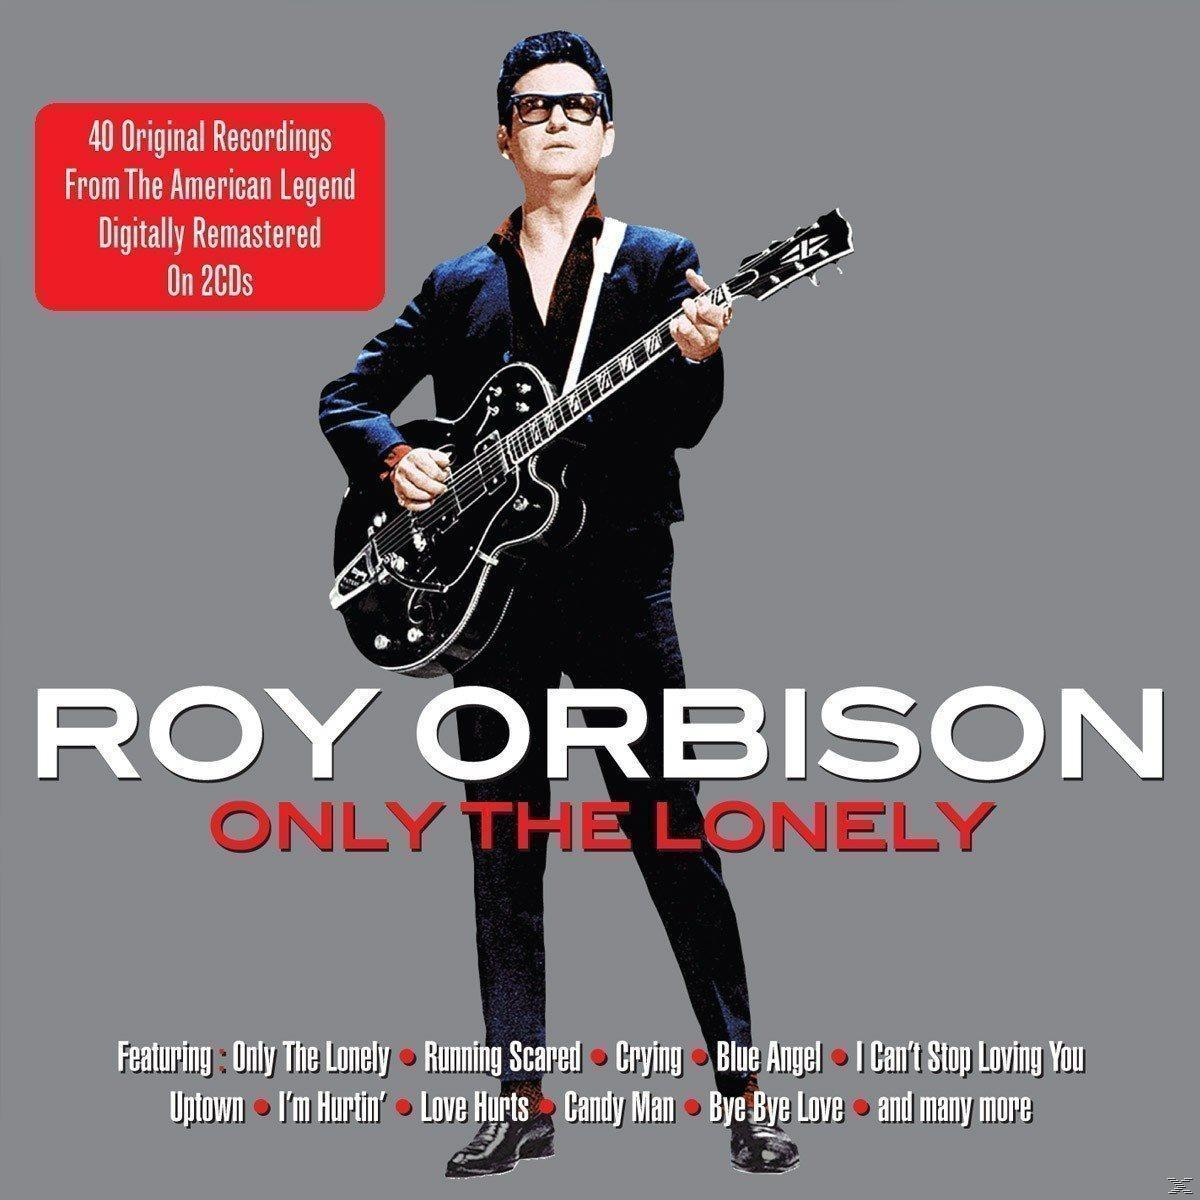 Roy The - Orbison - (CD) Lonely Only